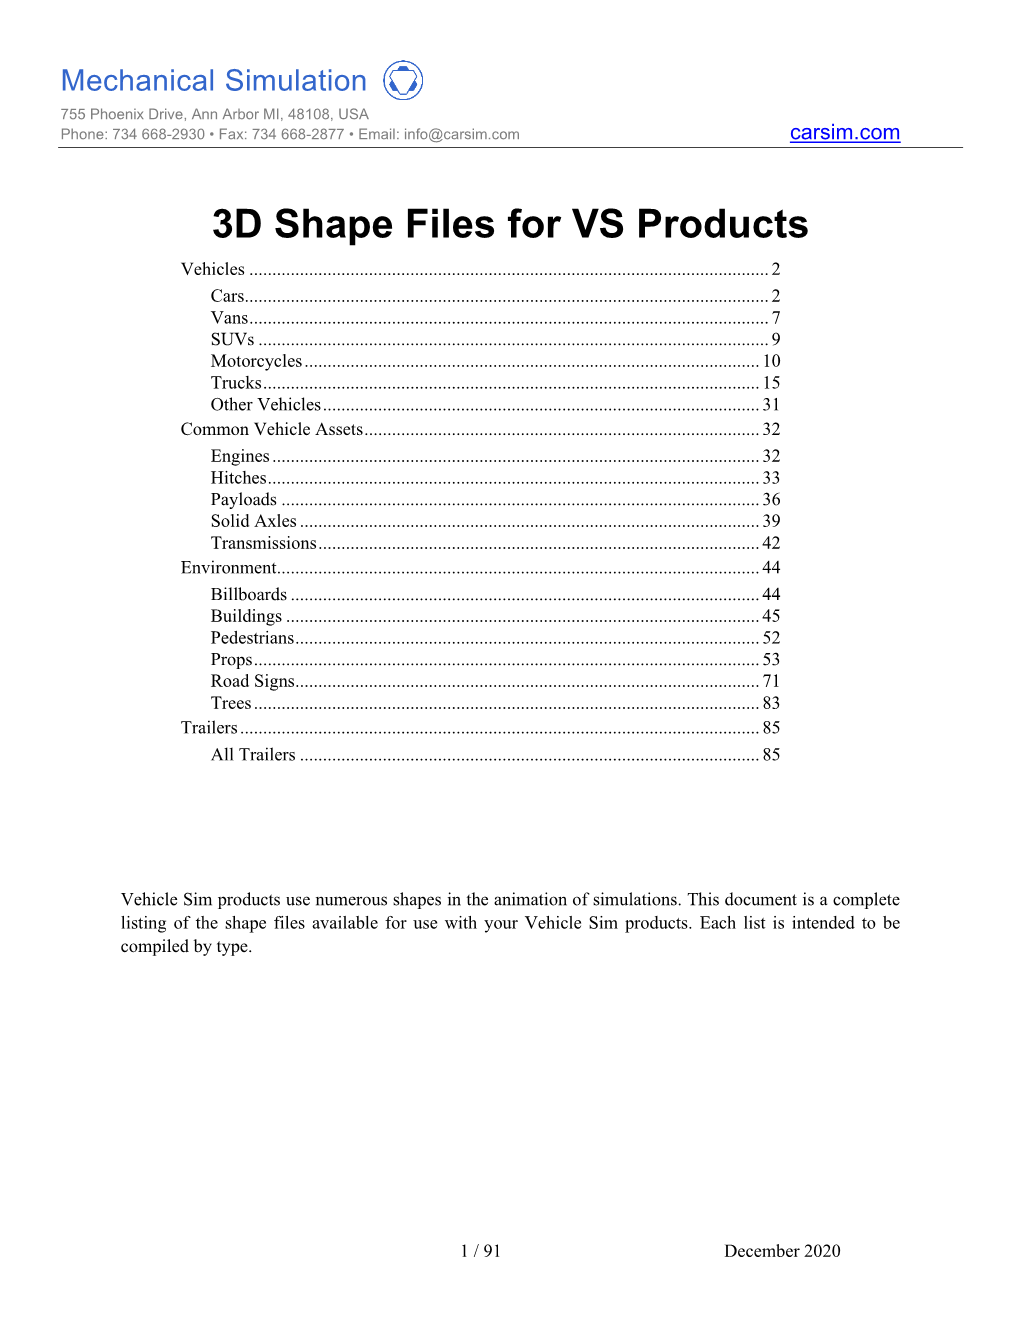 3D Shape Files for VS Products Vehicles